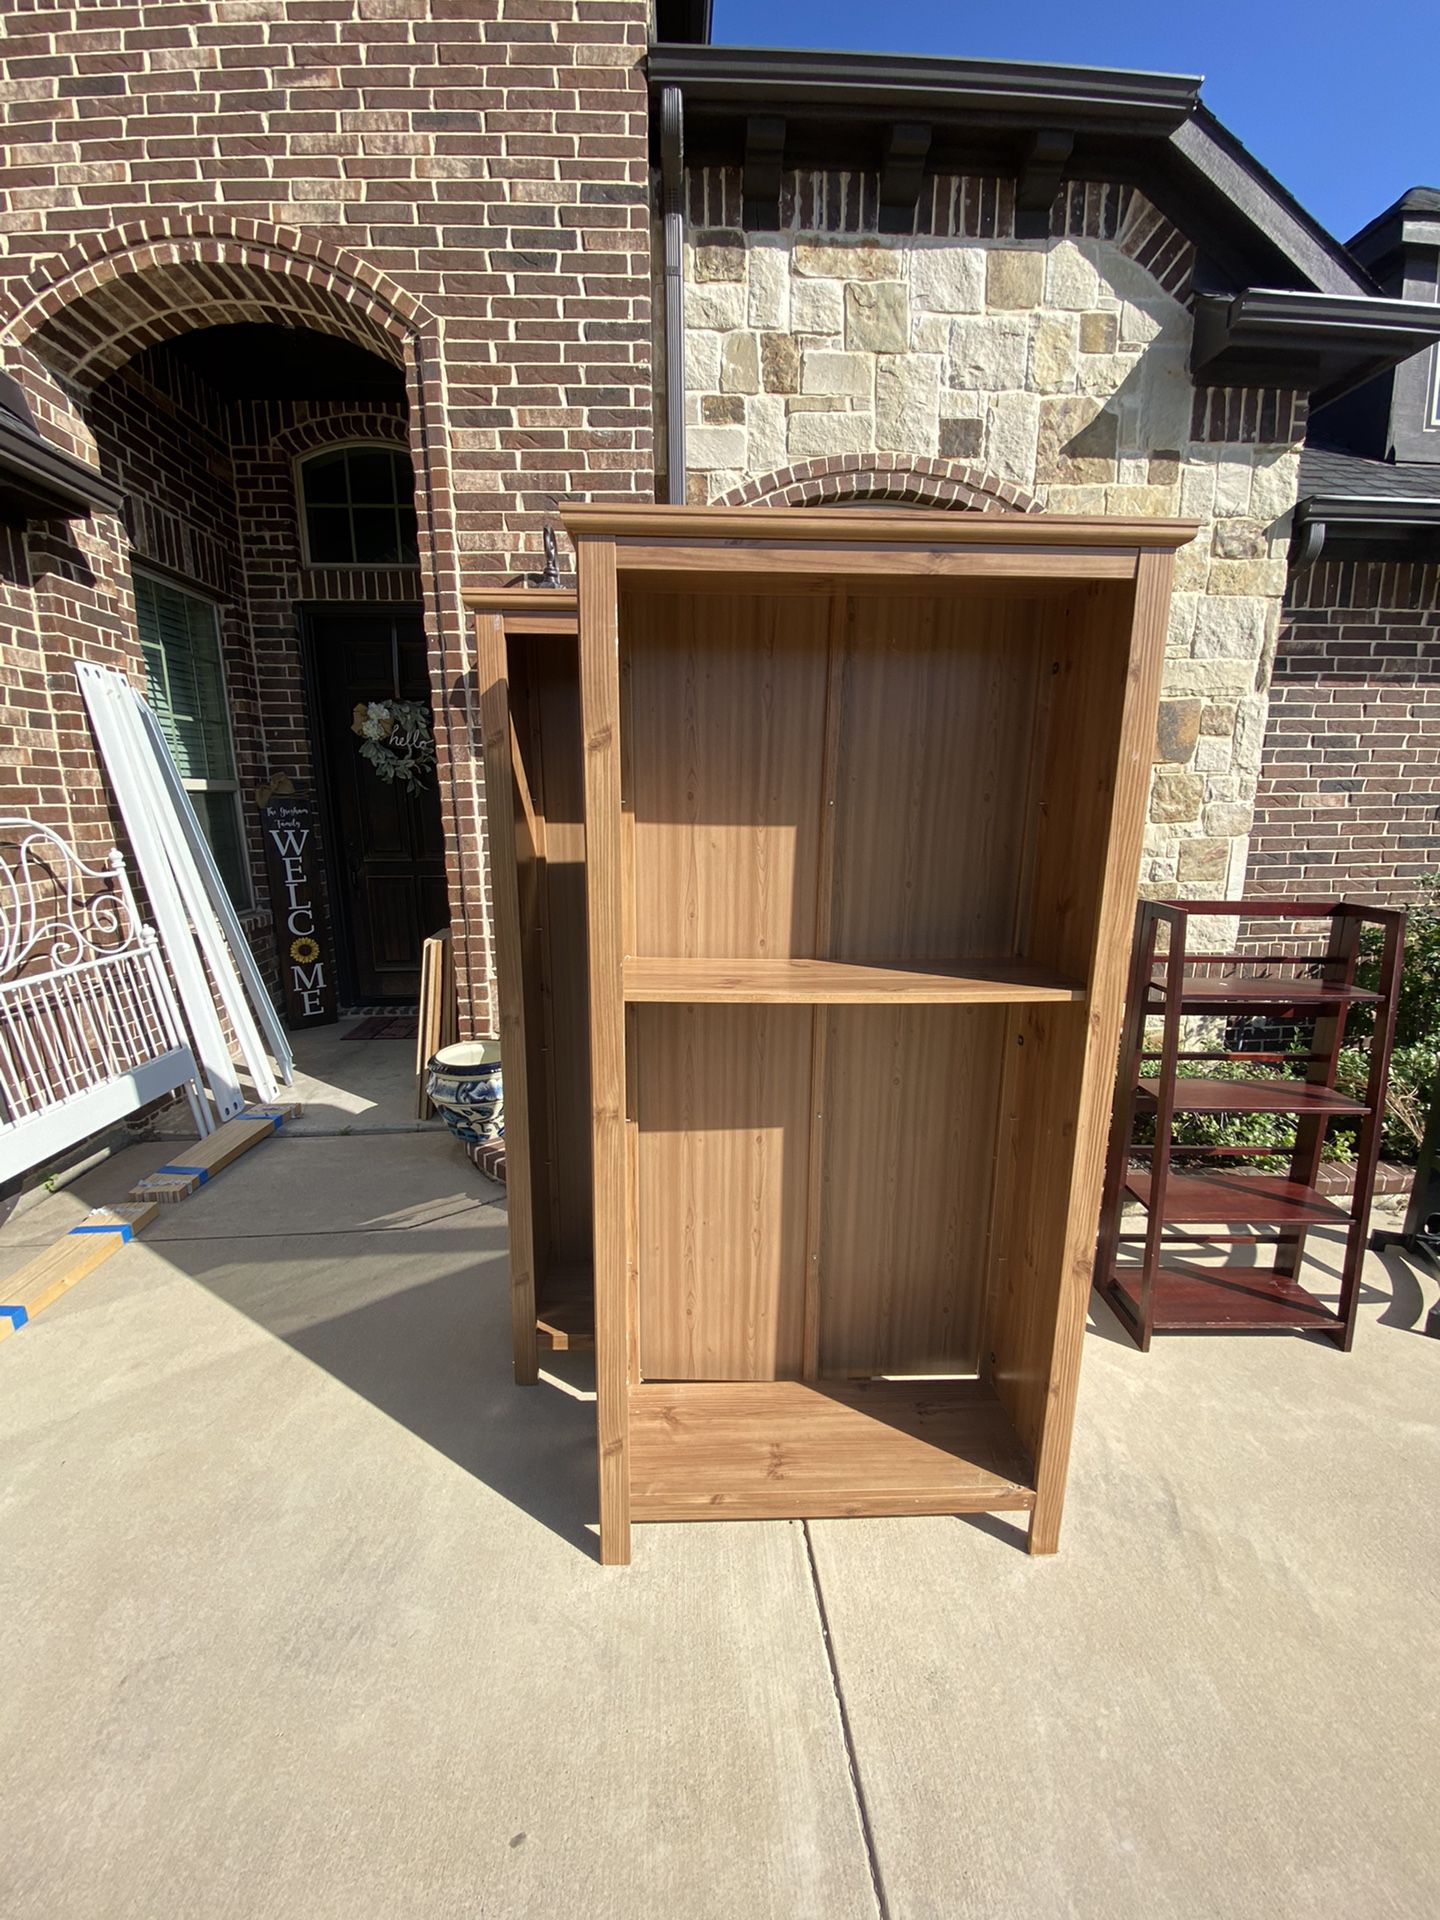 20.00 for 2 IKEA bookcases. Comes with 4 shelves each